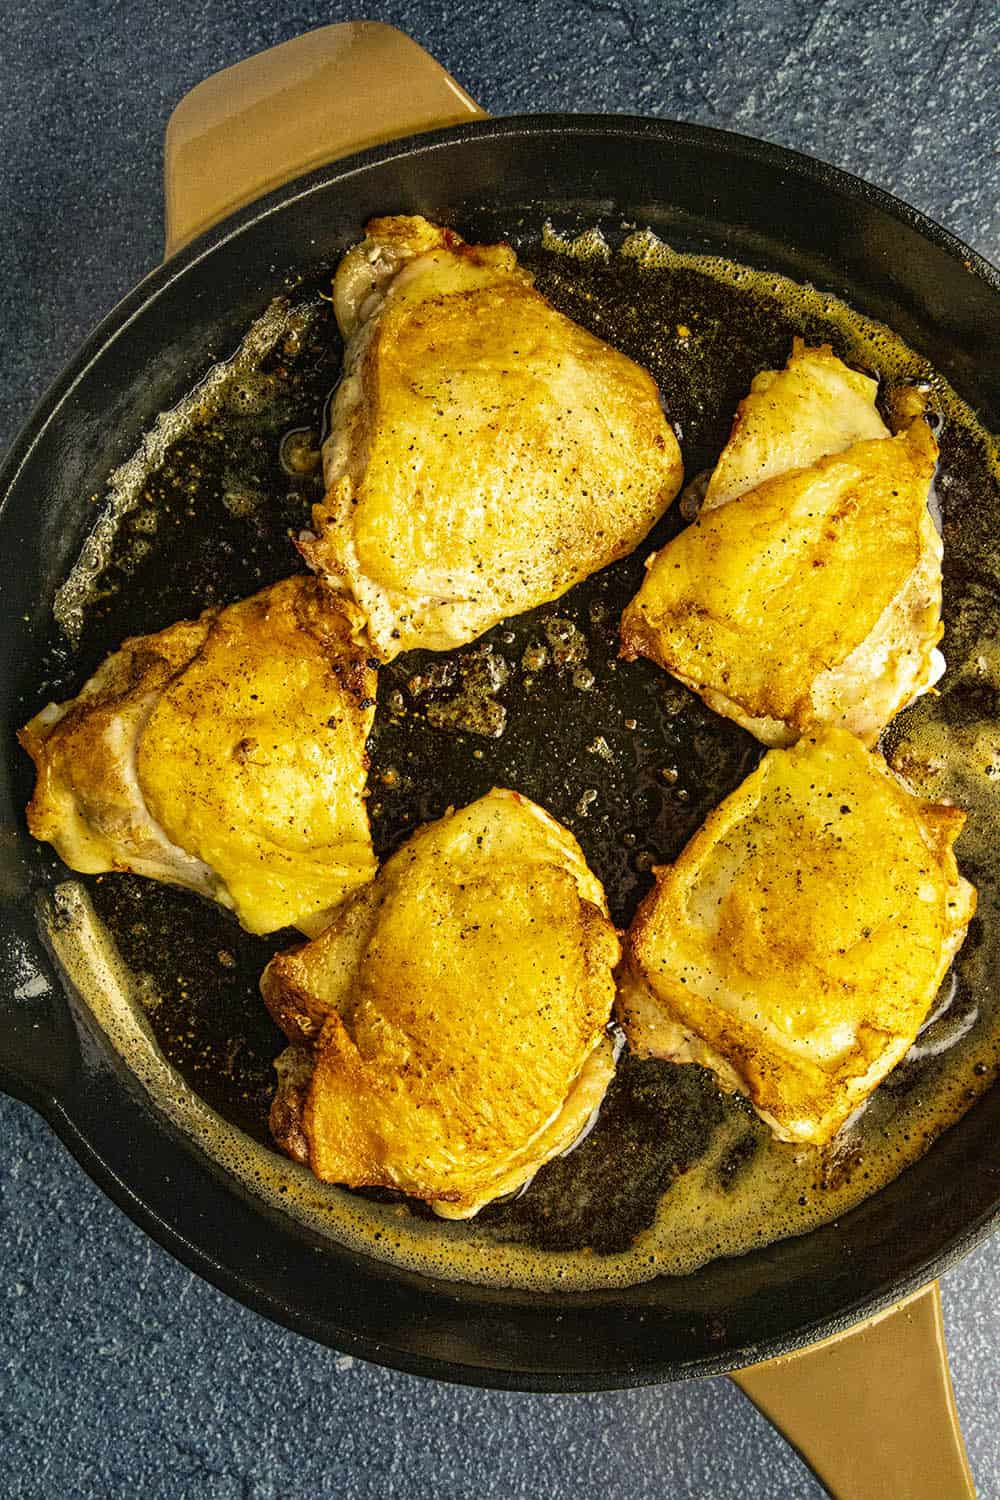 Browning and rendering the chicken thighs